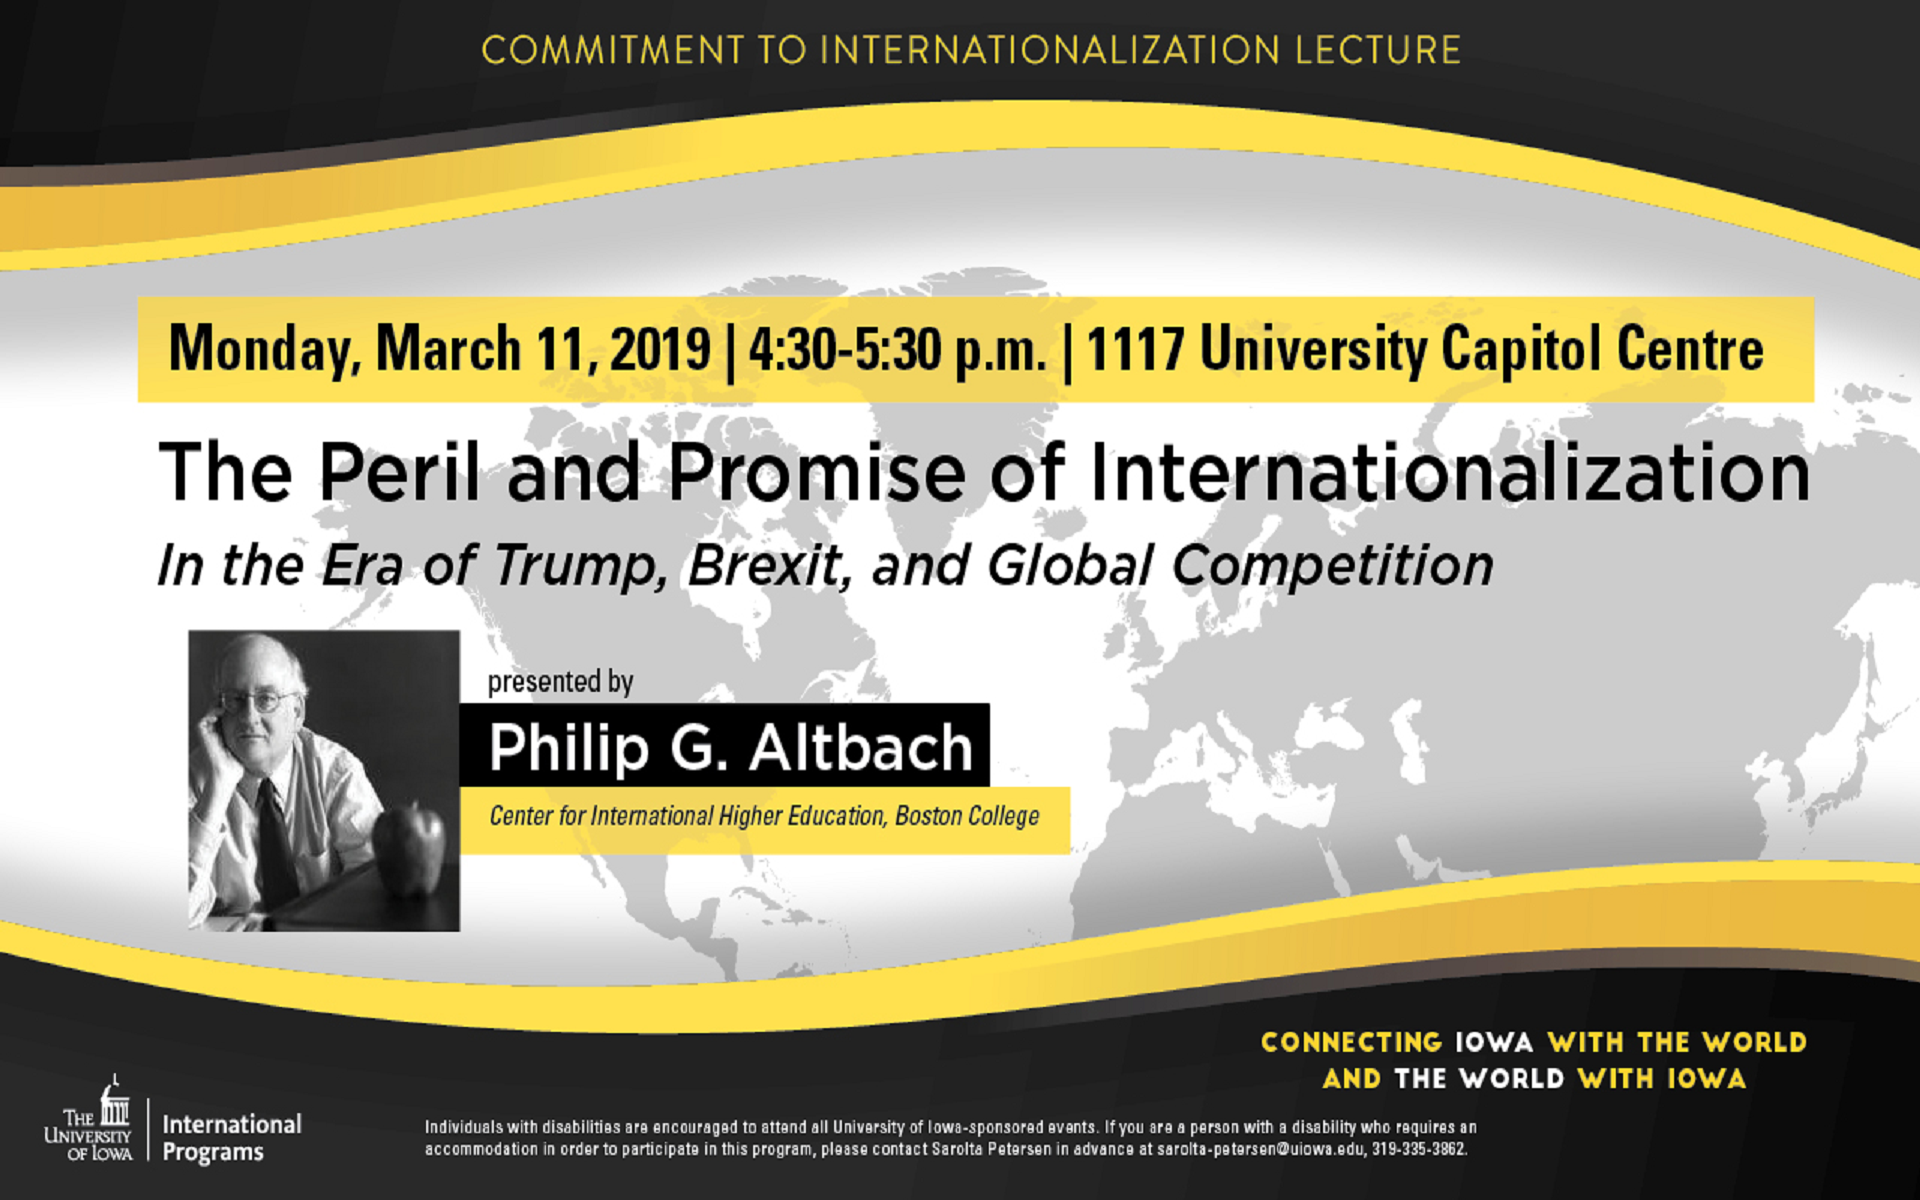 Committment to Internationalization Lecture